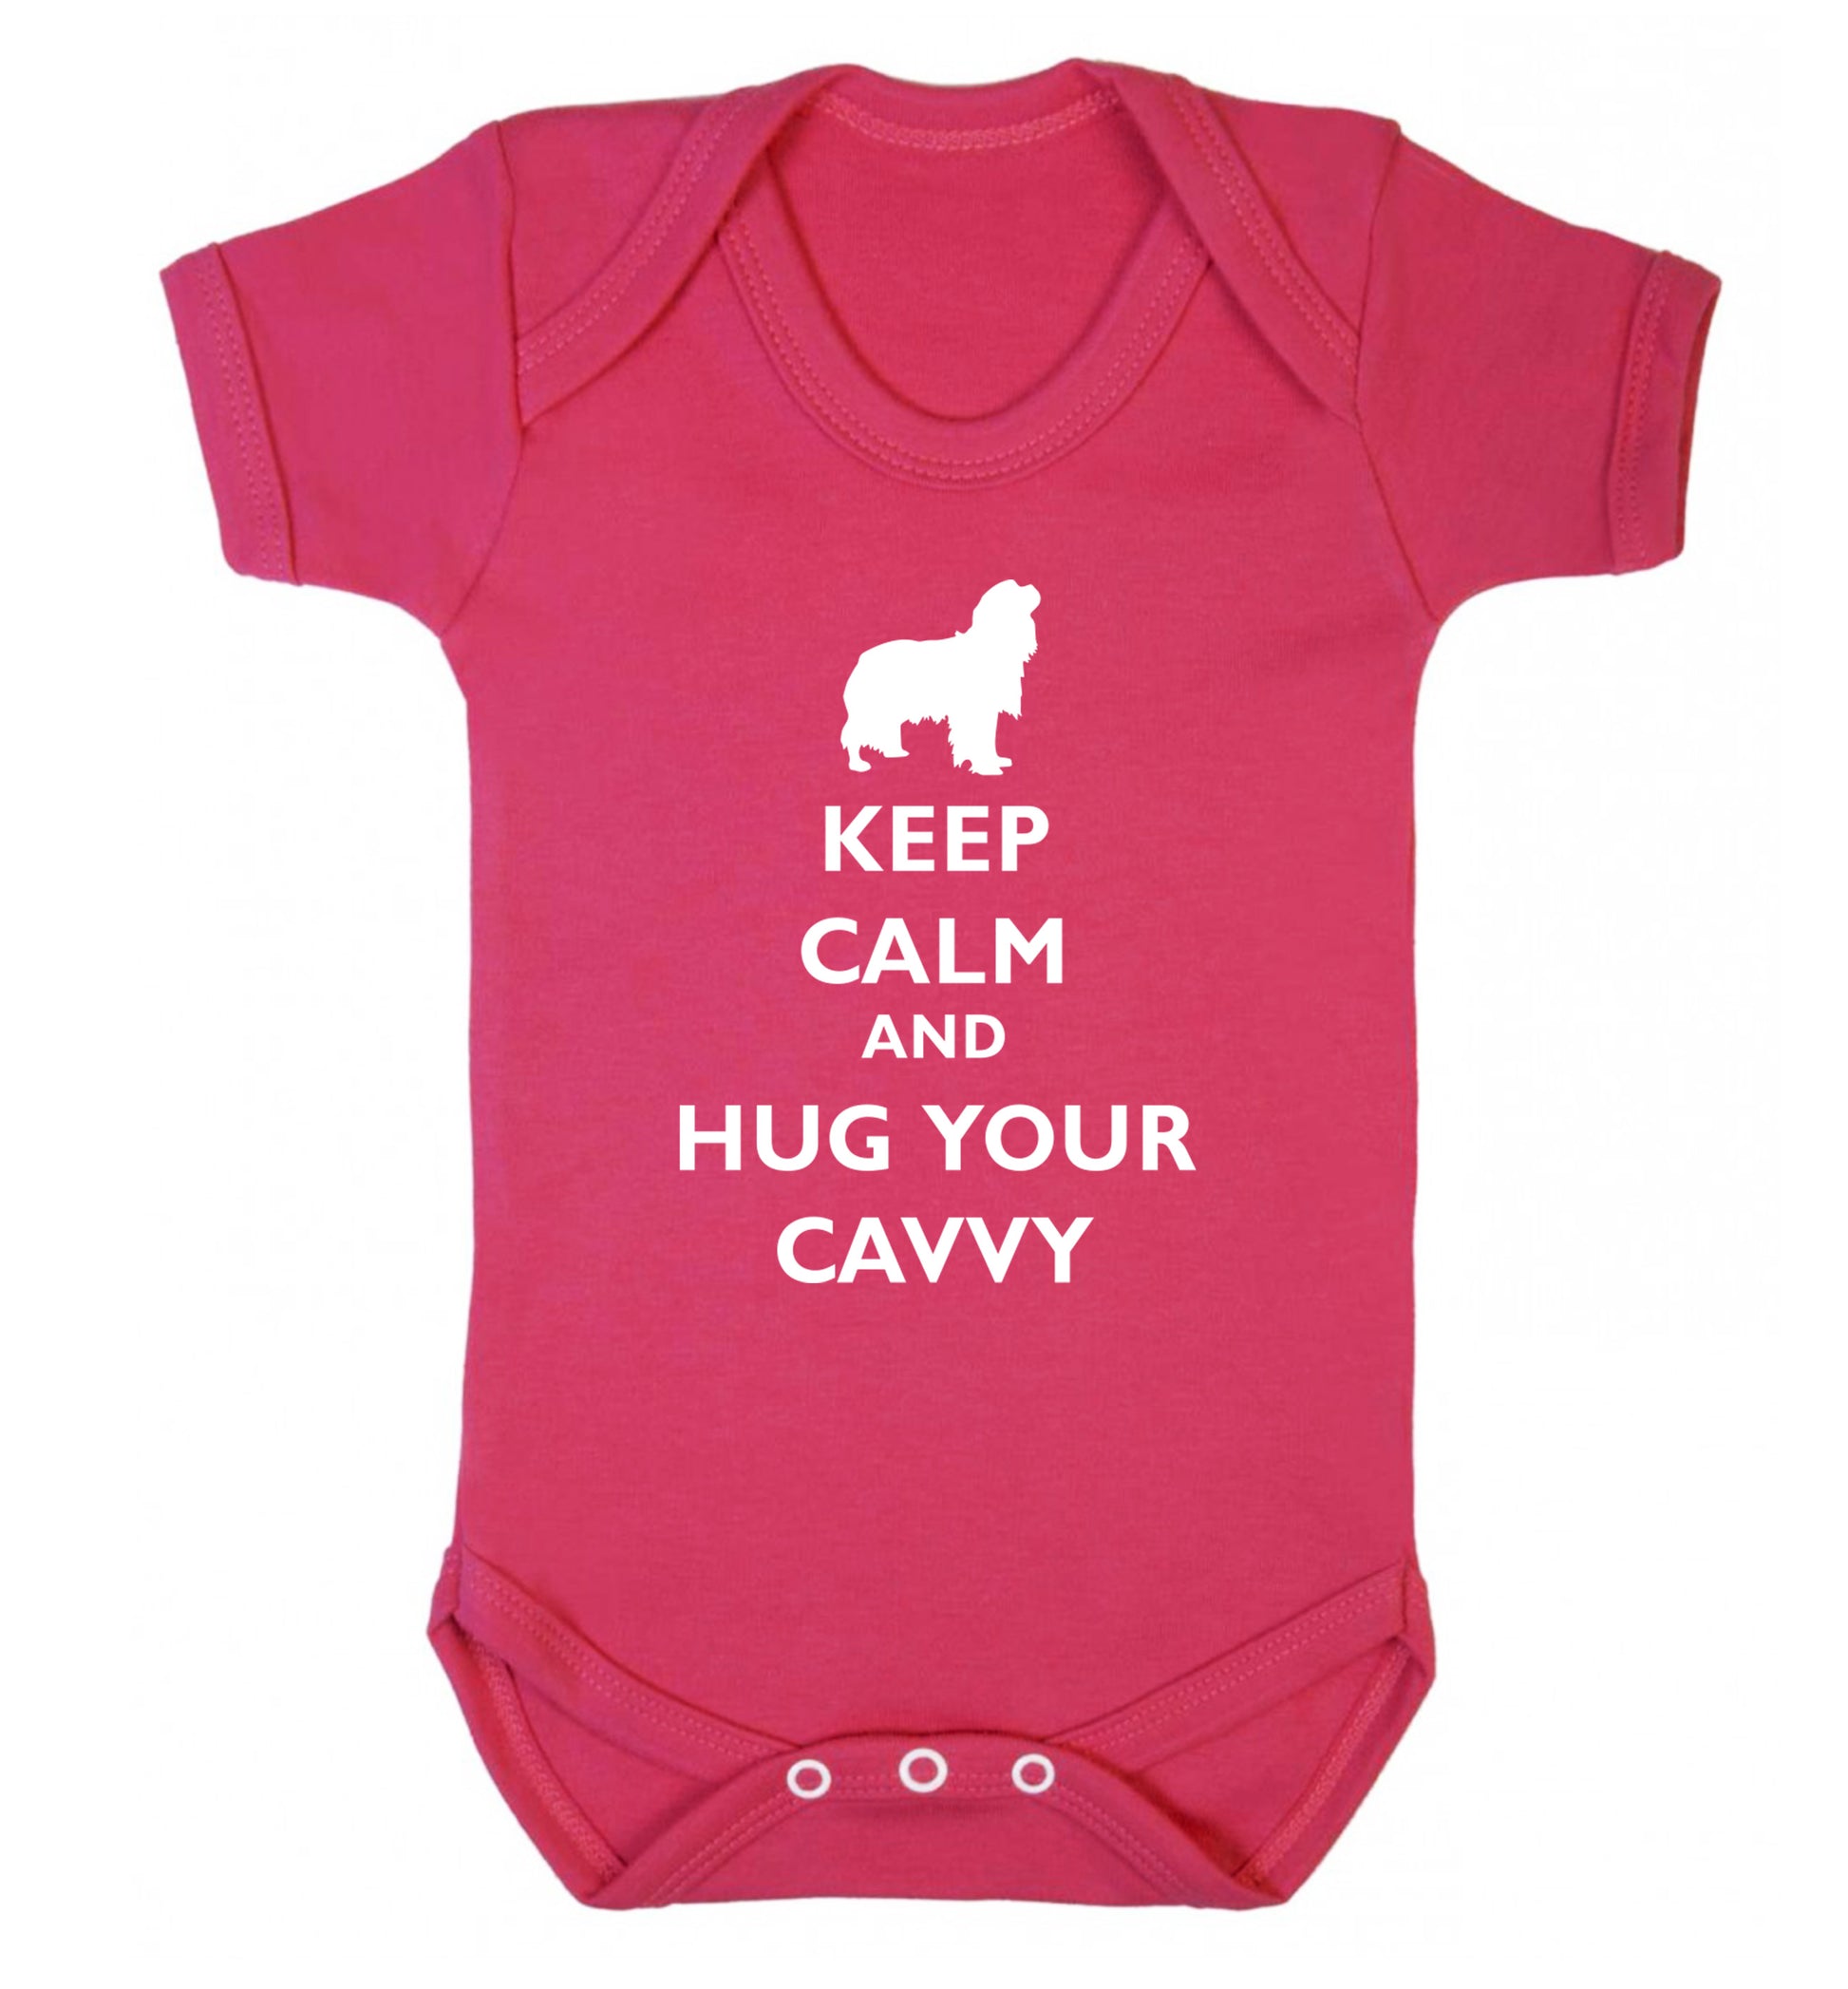 Keep calm and hug your cavvy Baby Vest dark pink 18-24 months